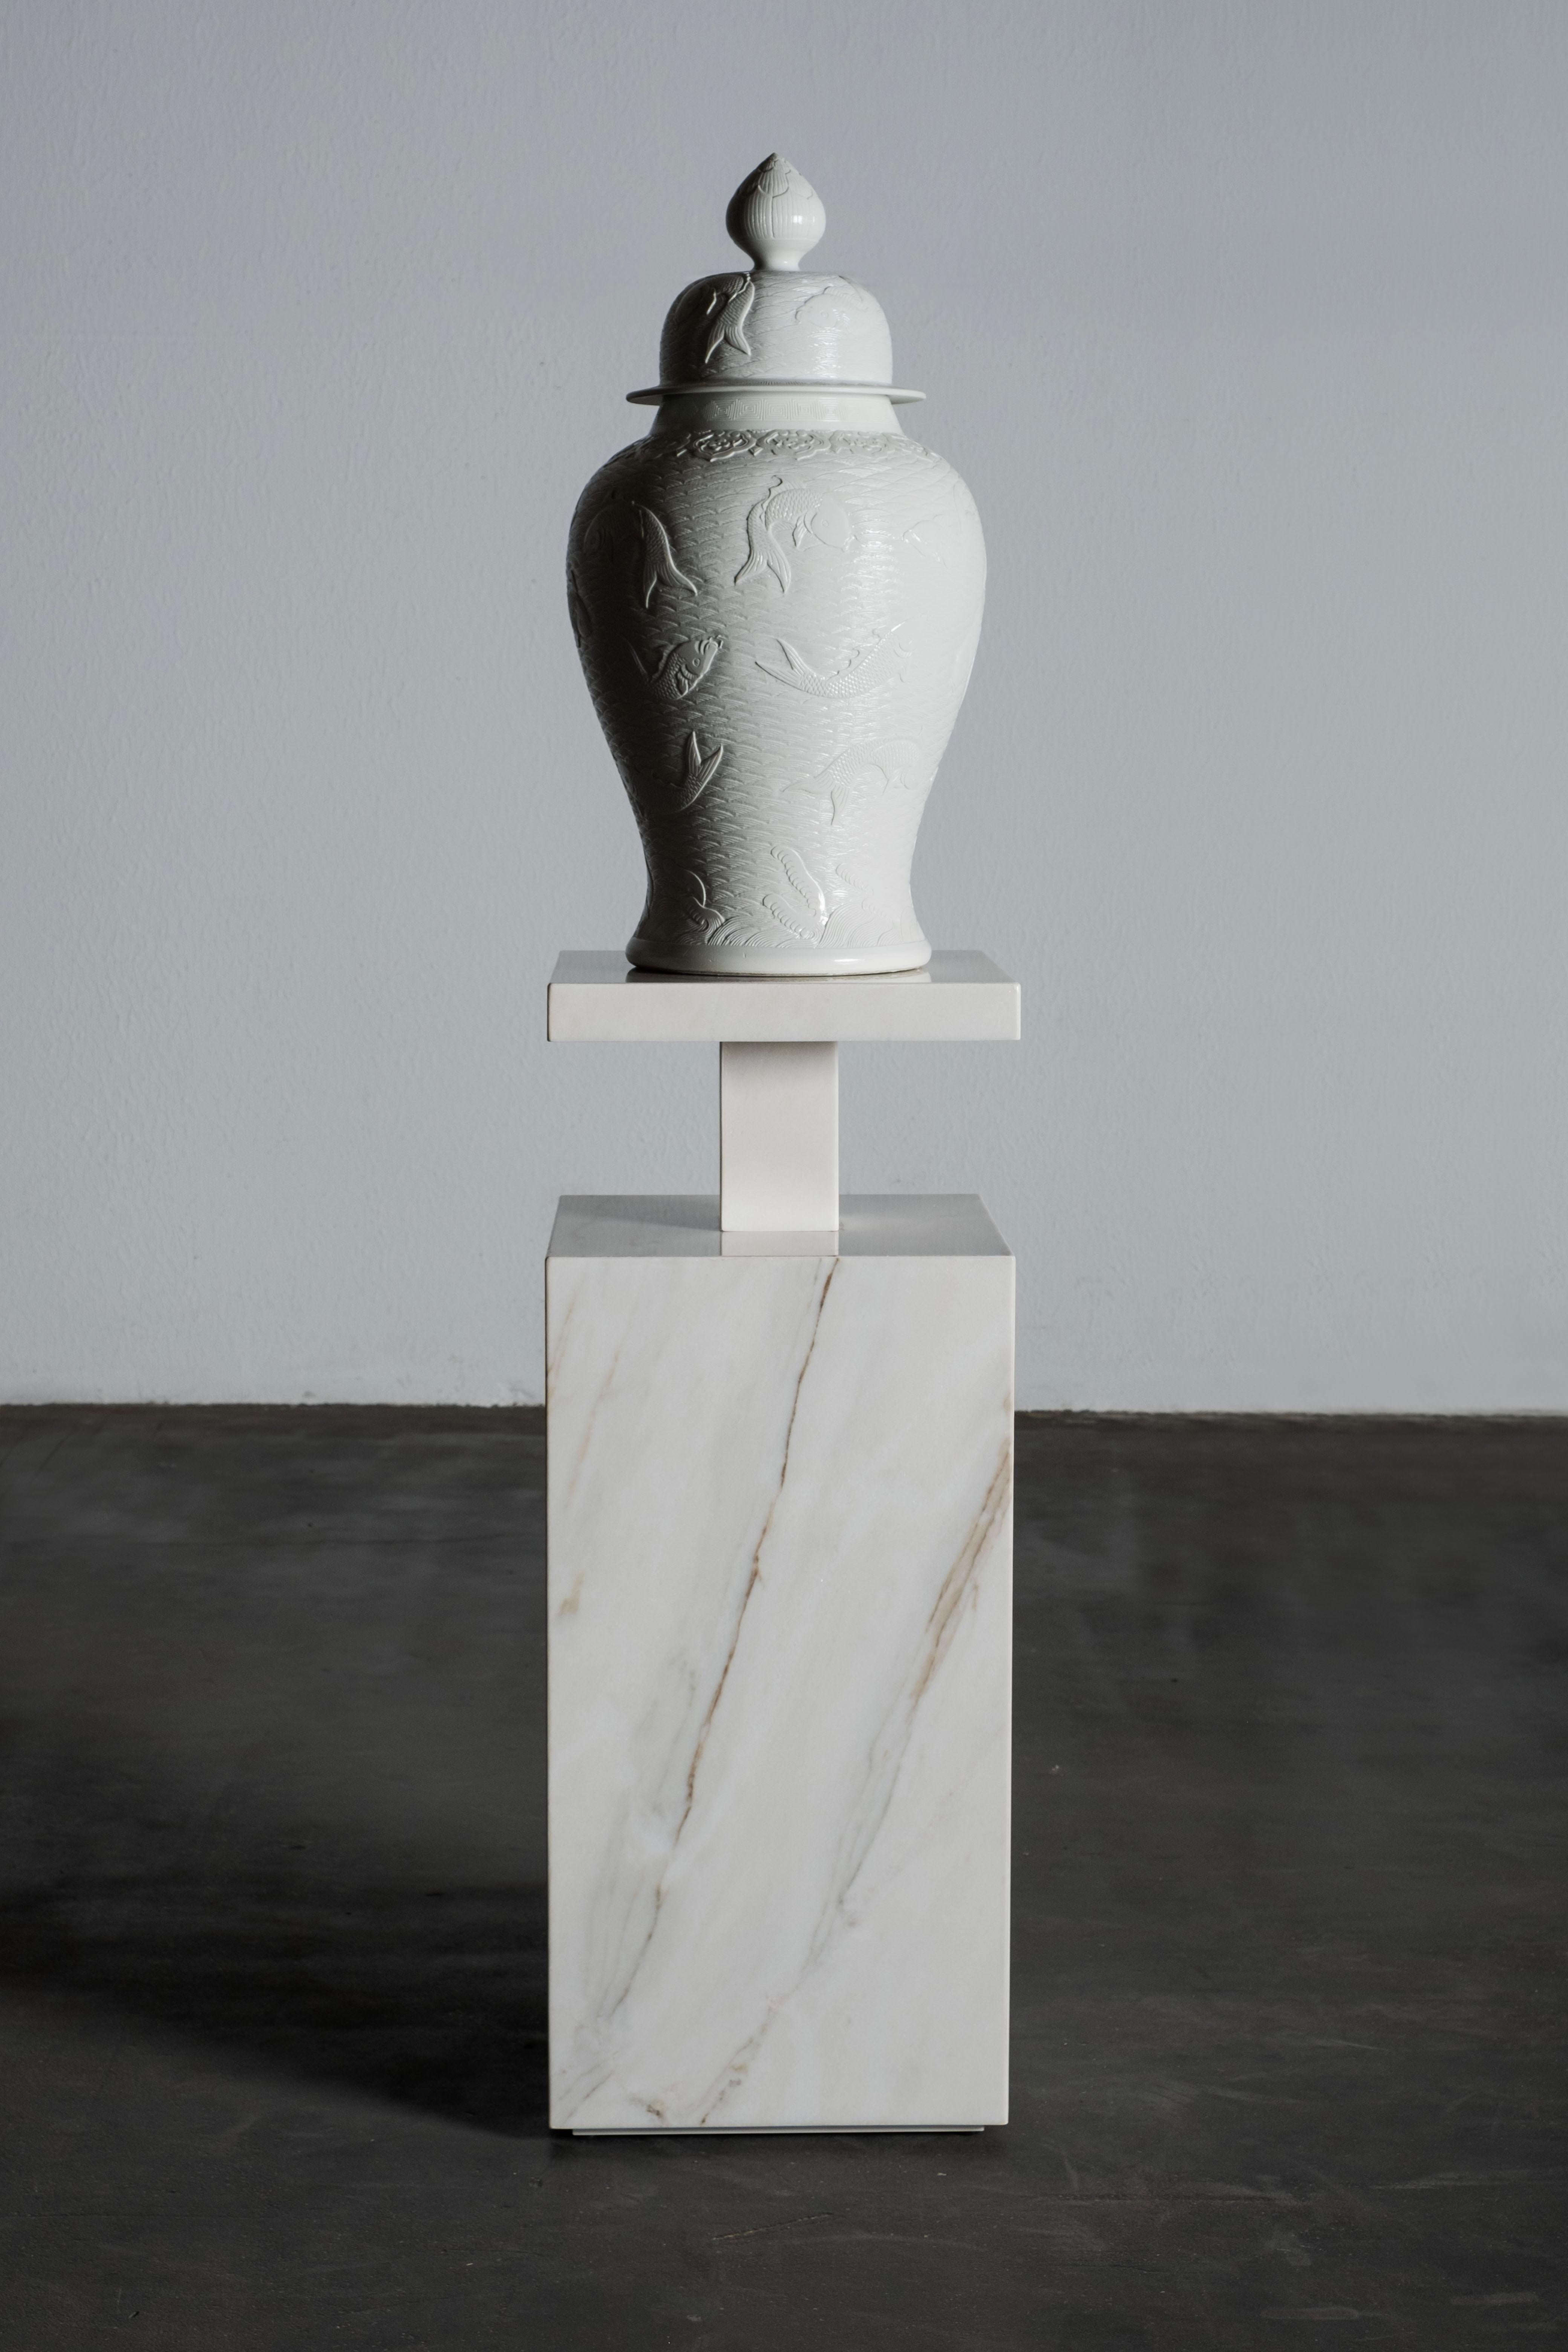 Monique Pedestal Stand, Handcrafted in Portugal - Europe by Greenapple.

Monique is the perfect standing piece of art to enhance any interior. Monique is a unique design in Calacatta Cremo marble that stands out for its presence and stands on its